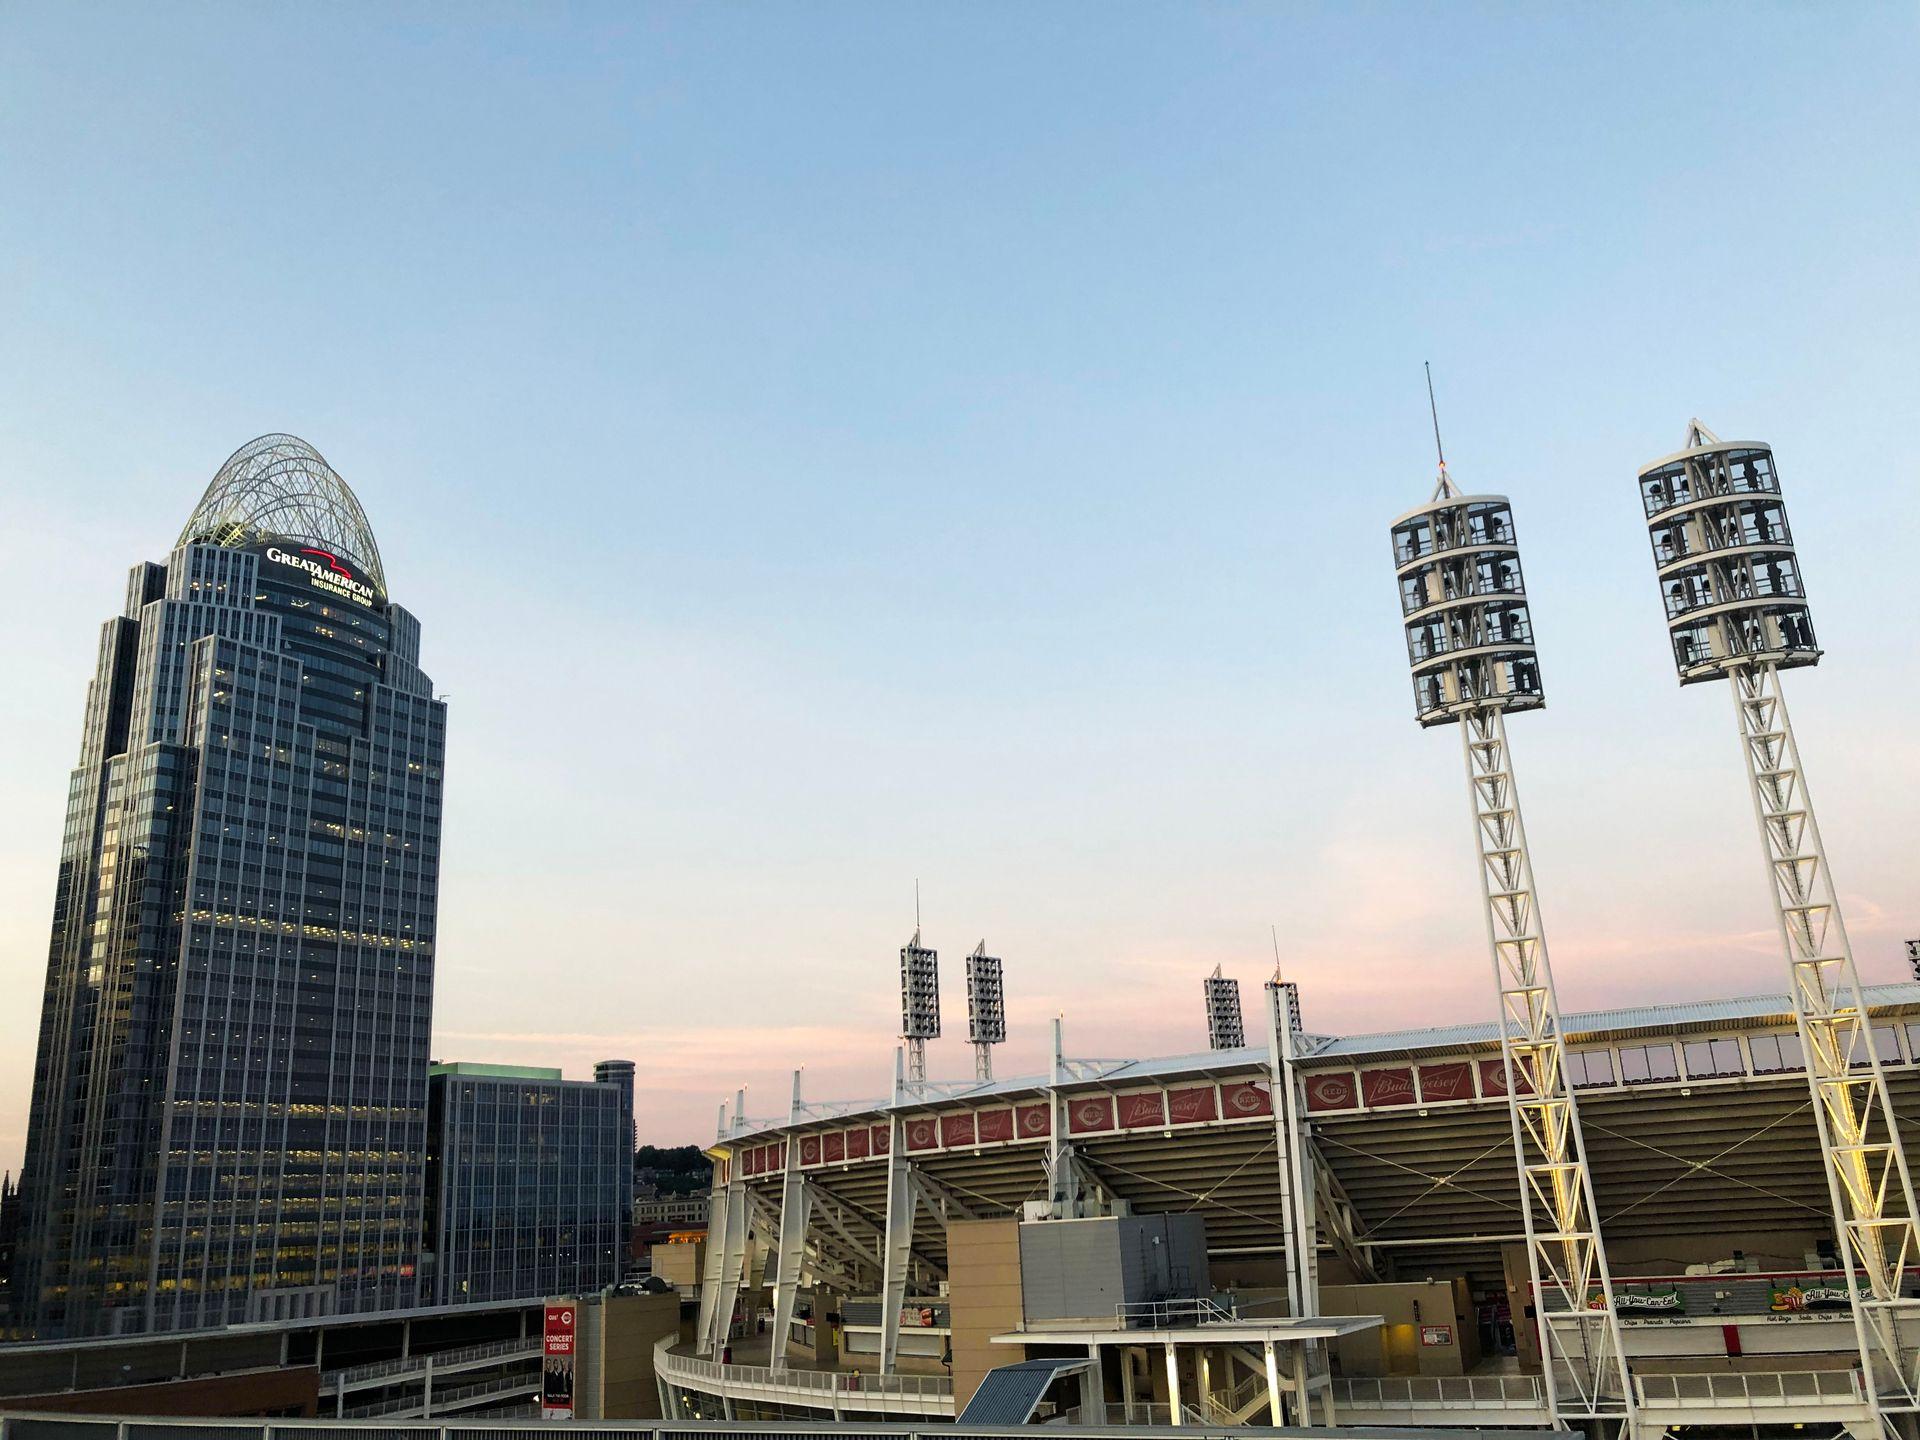 Standing outside the Great American Ballpark. The ballpark is on the right and you can see the Great American Tower on the left.